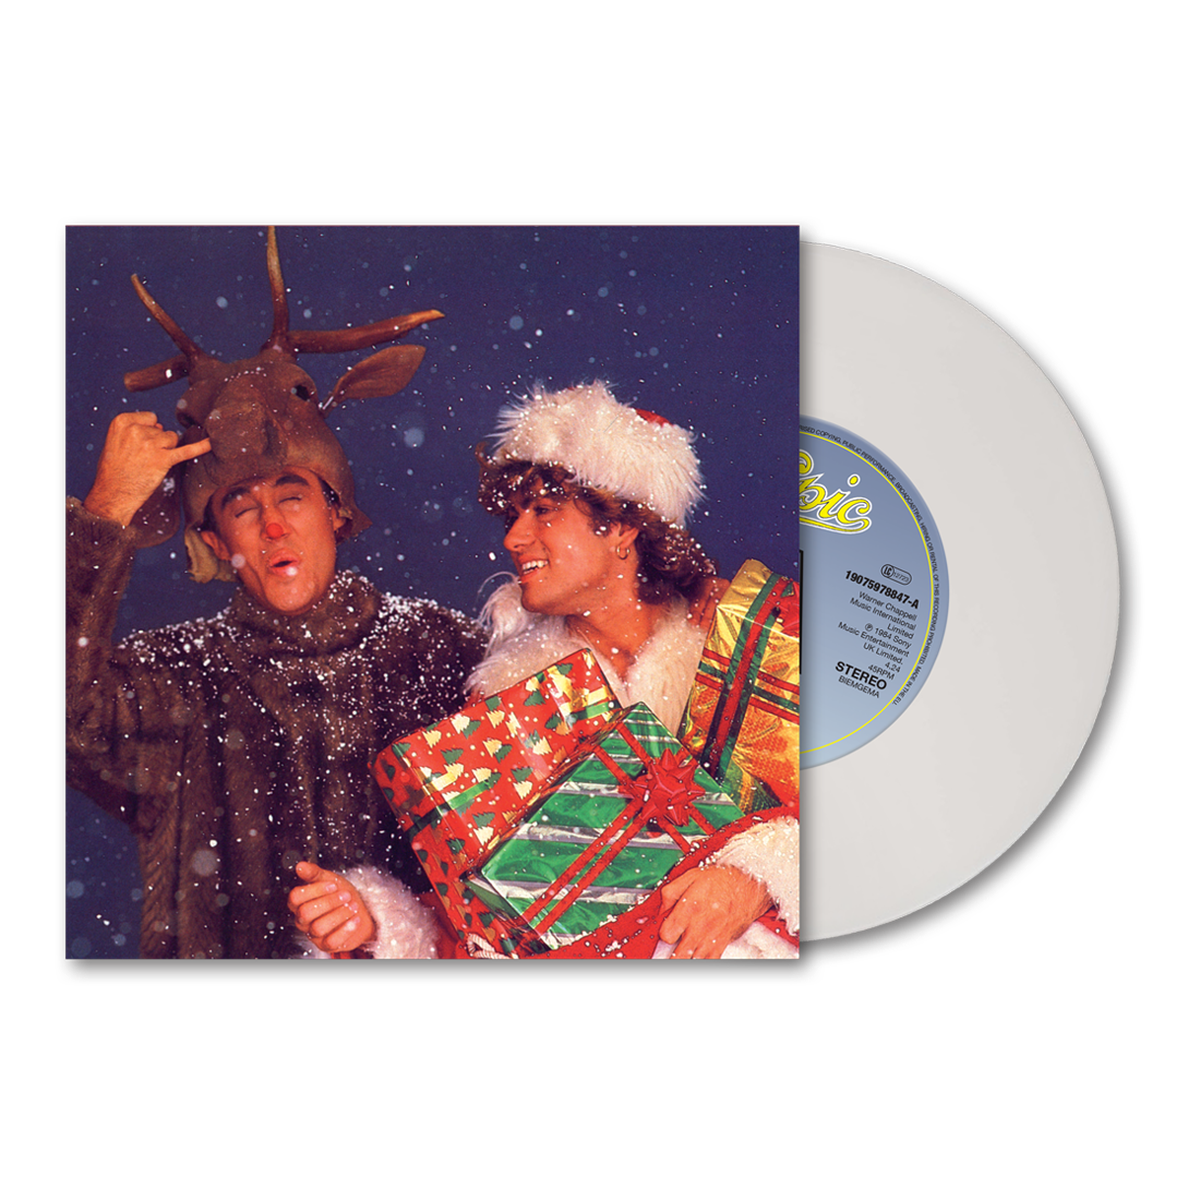 Wham!'s 'Last Christmas' is coming out on vinyl to celebrate 35th anniversary -